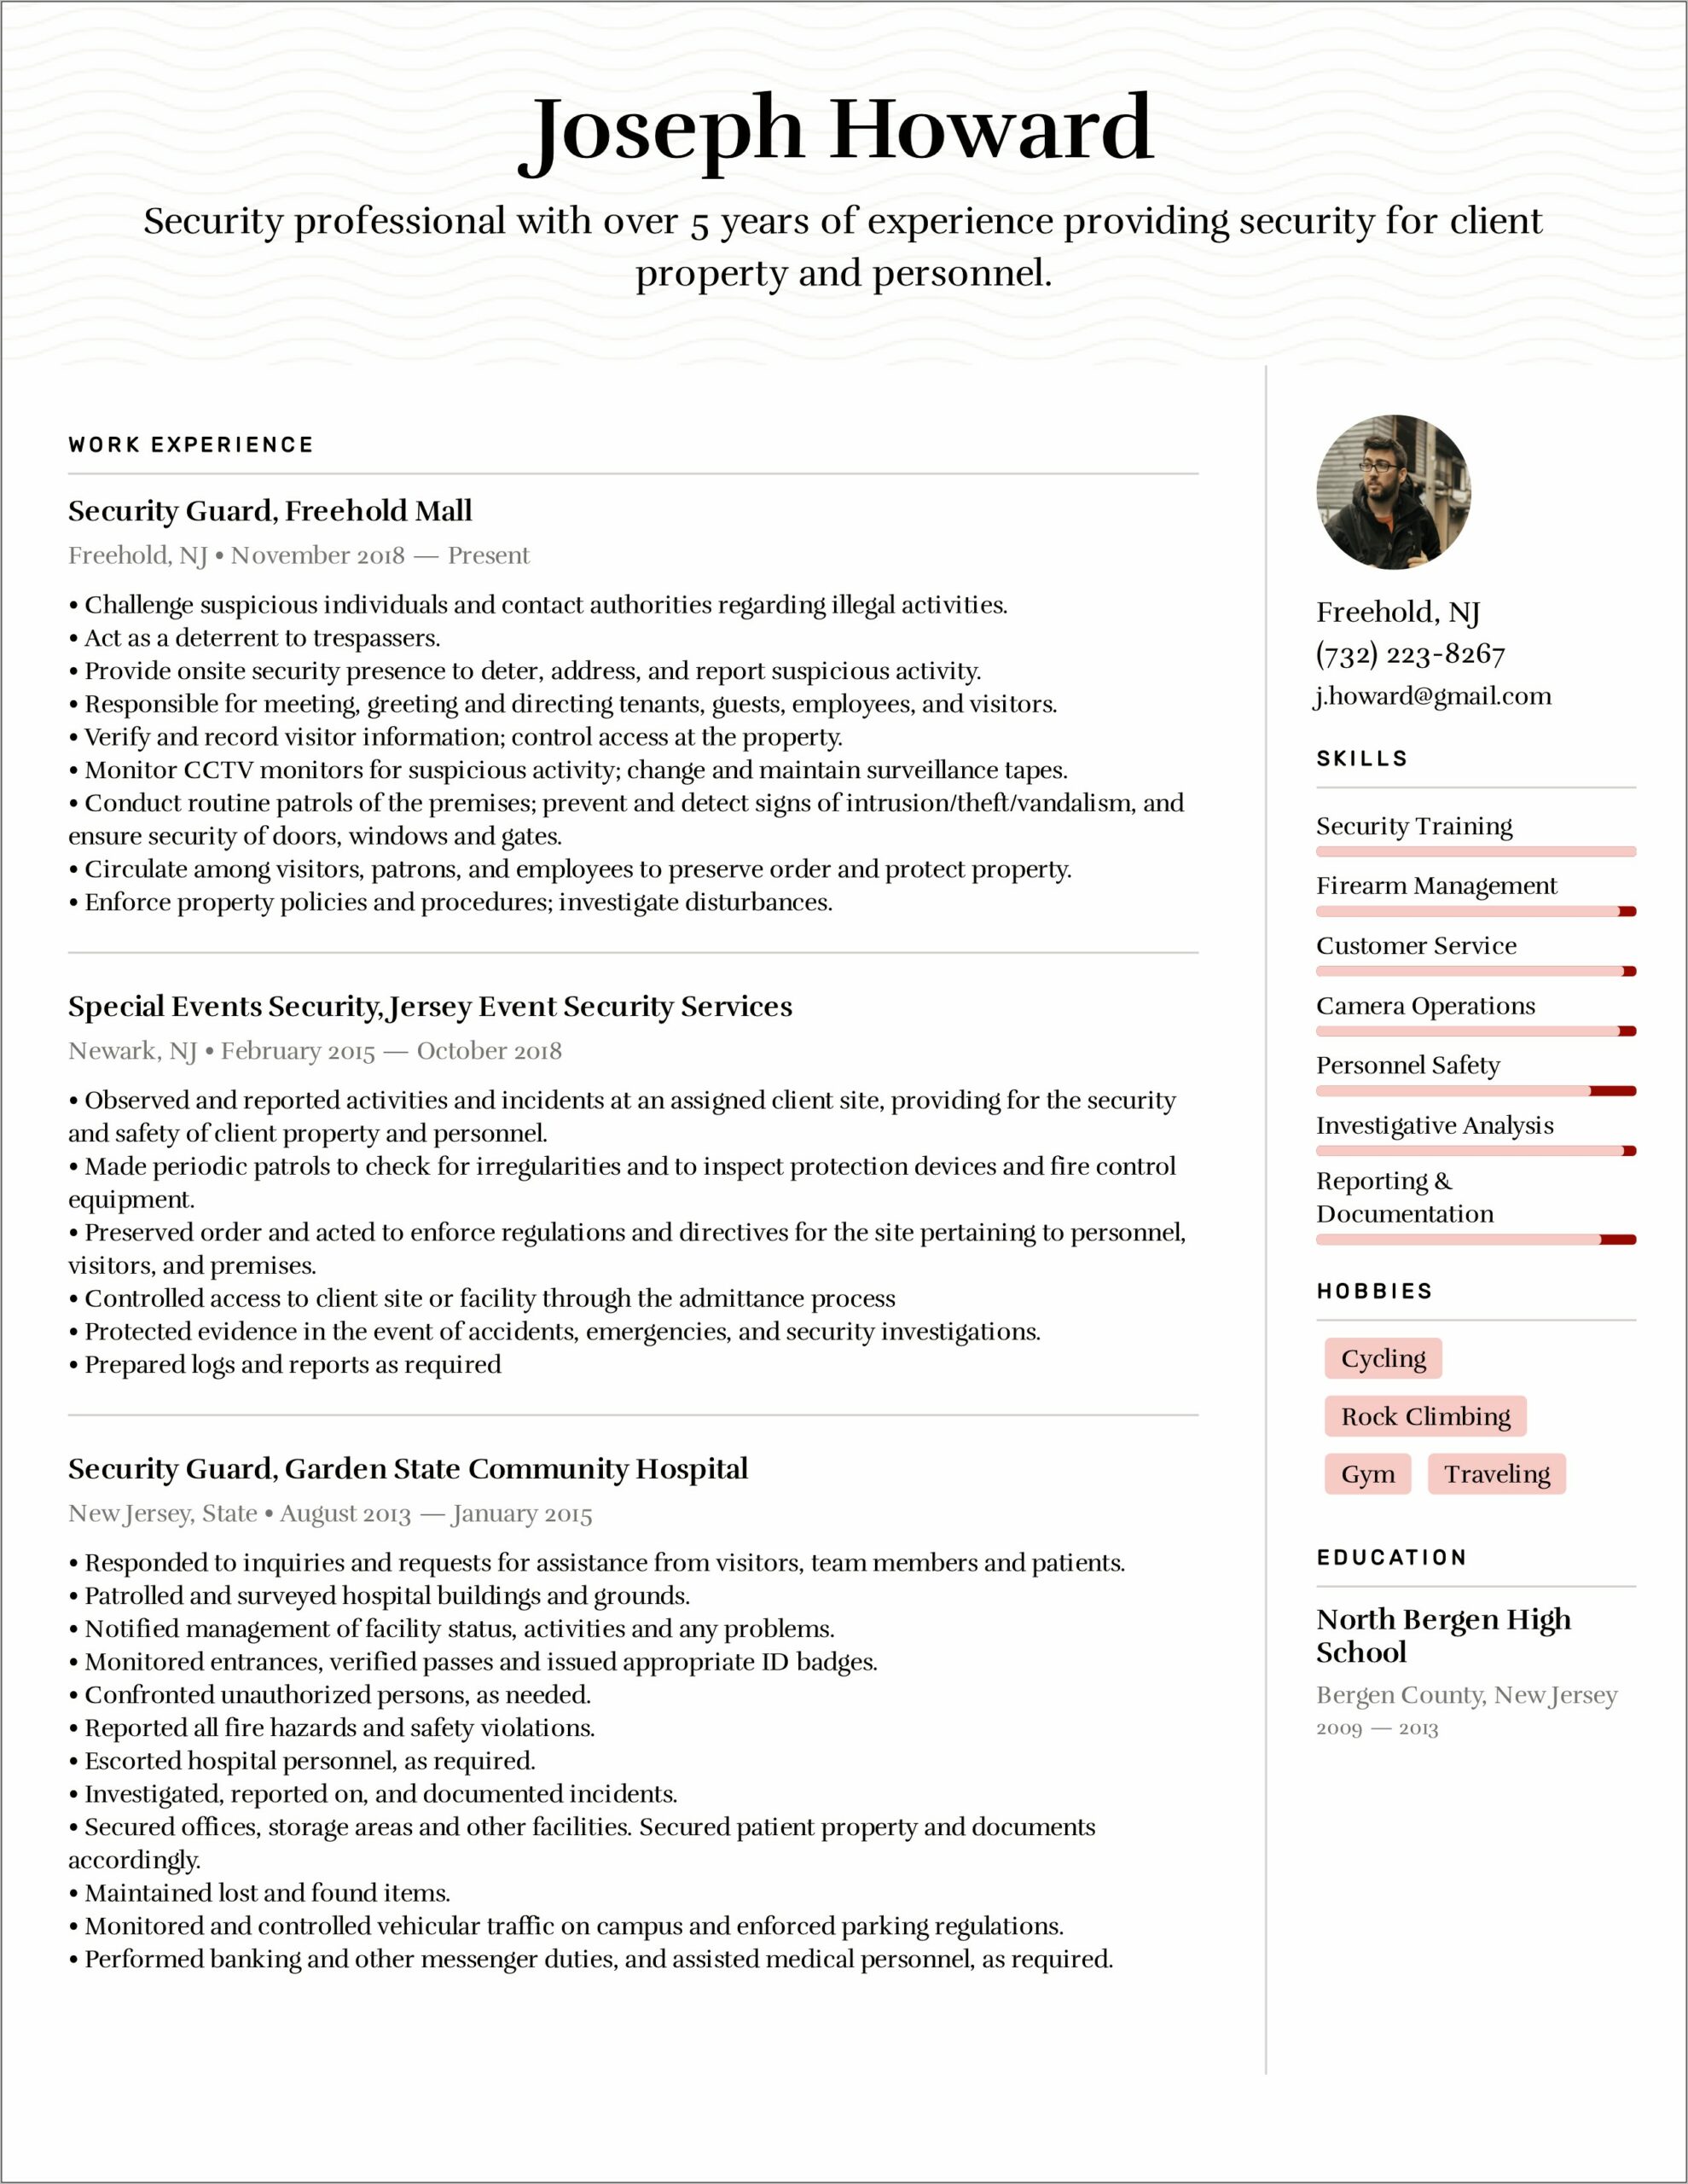 Sample Resumes For Low Income Jobs